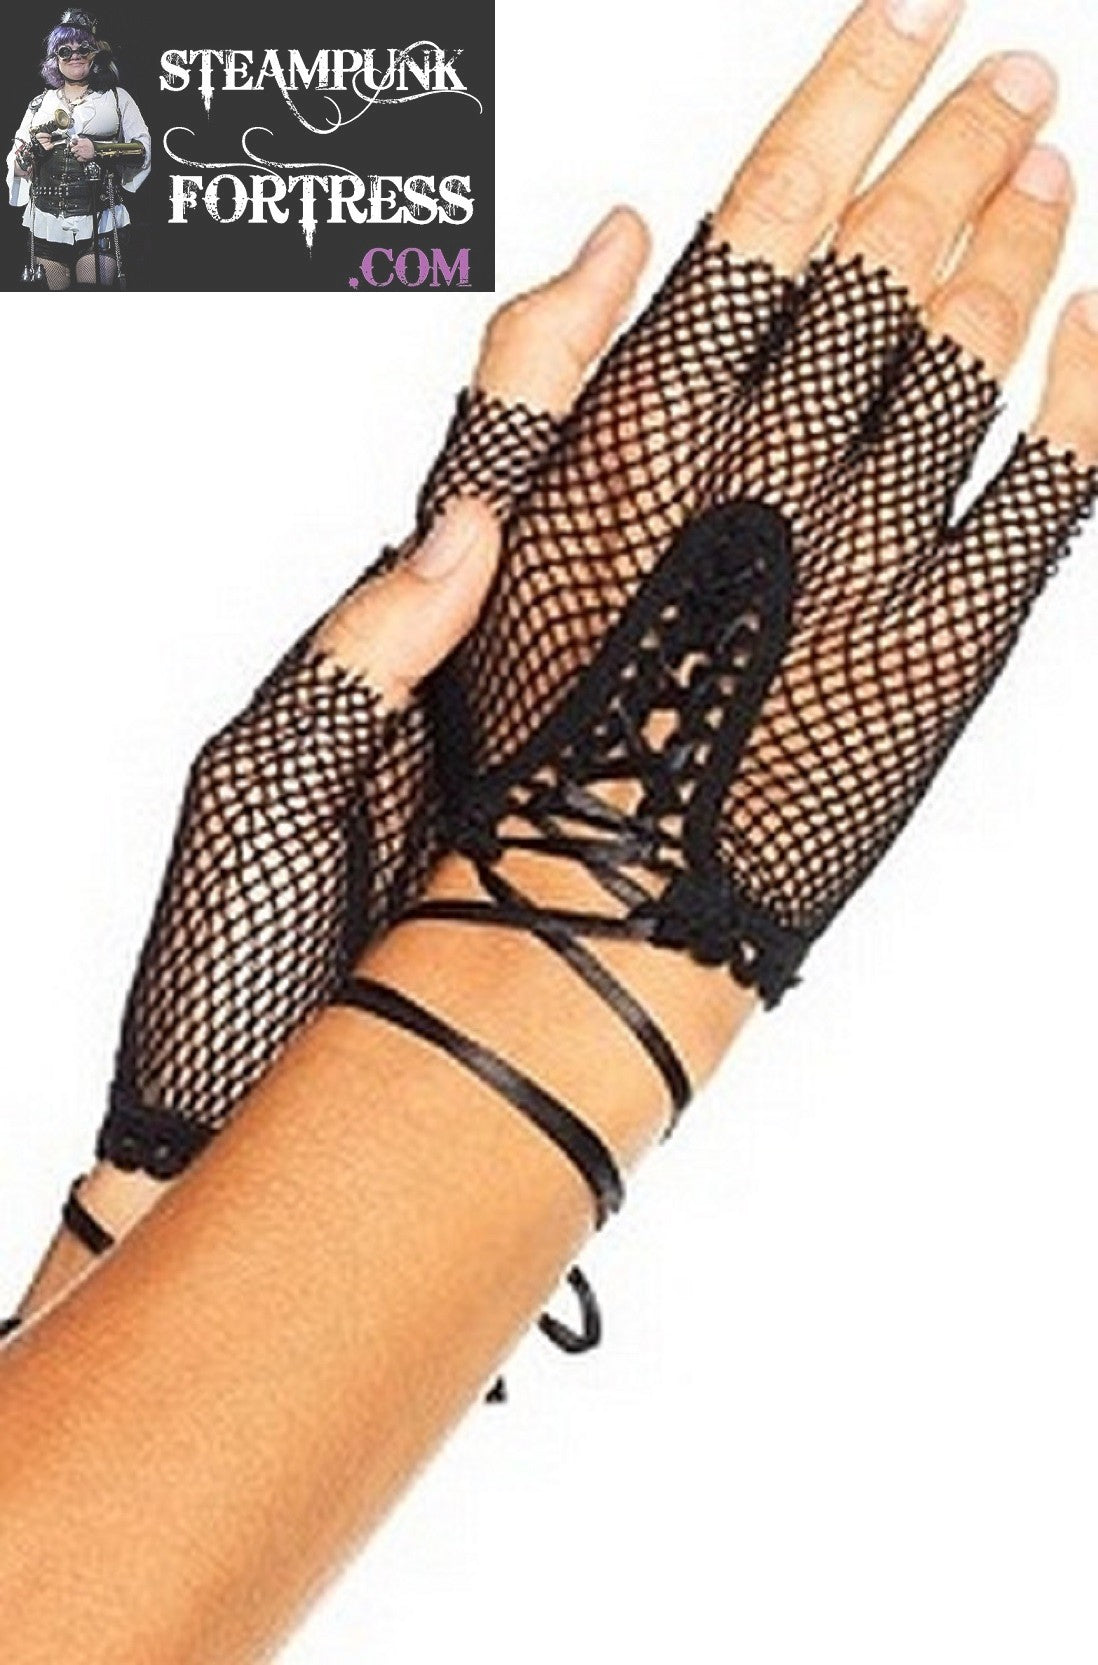 BLACK FINGERLESS FISHNET GLOVES LACE UP TIE WRIST LENGTH 80S COSPLAY C –  Steampunk Fortress